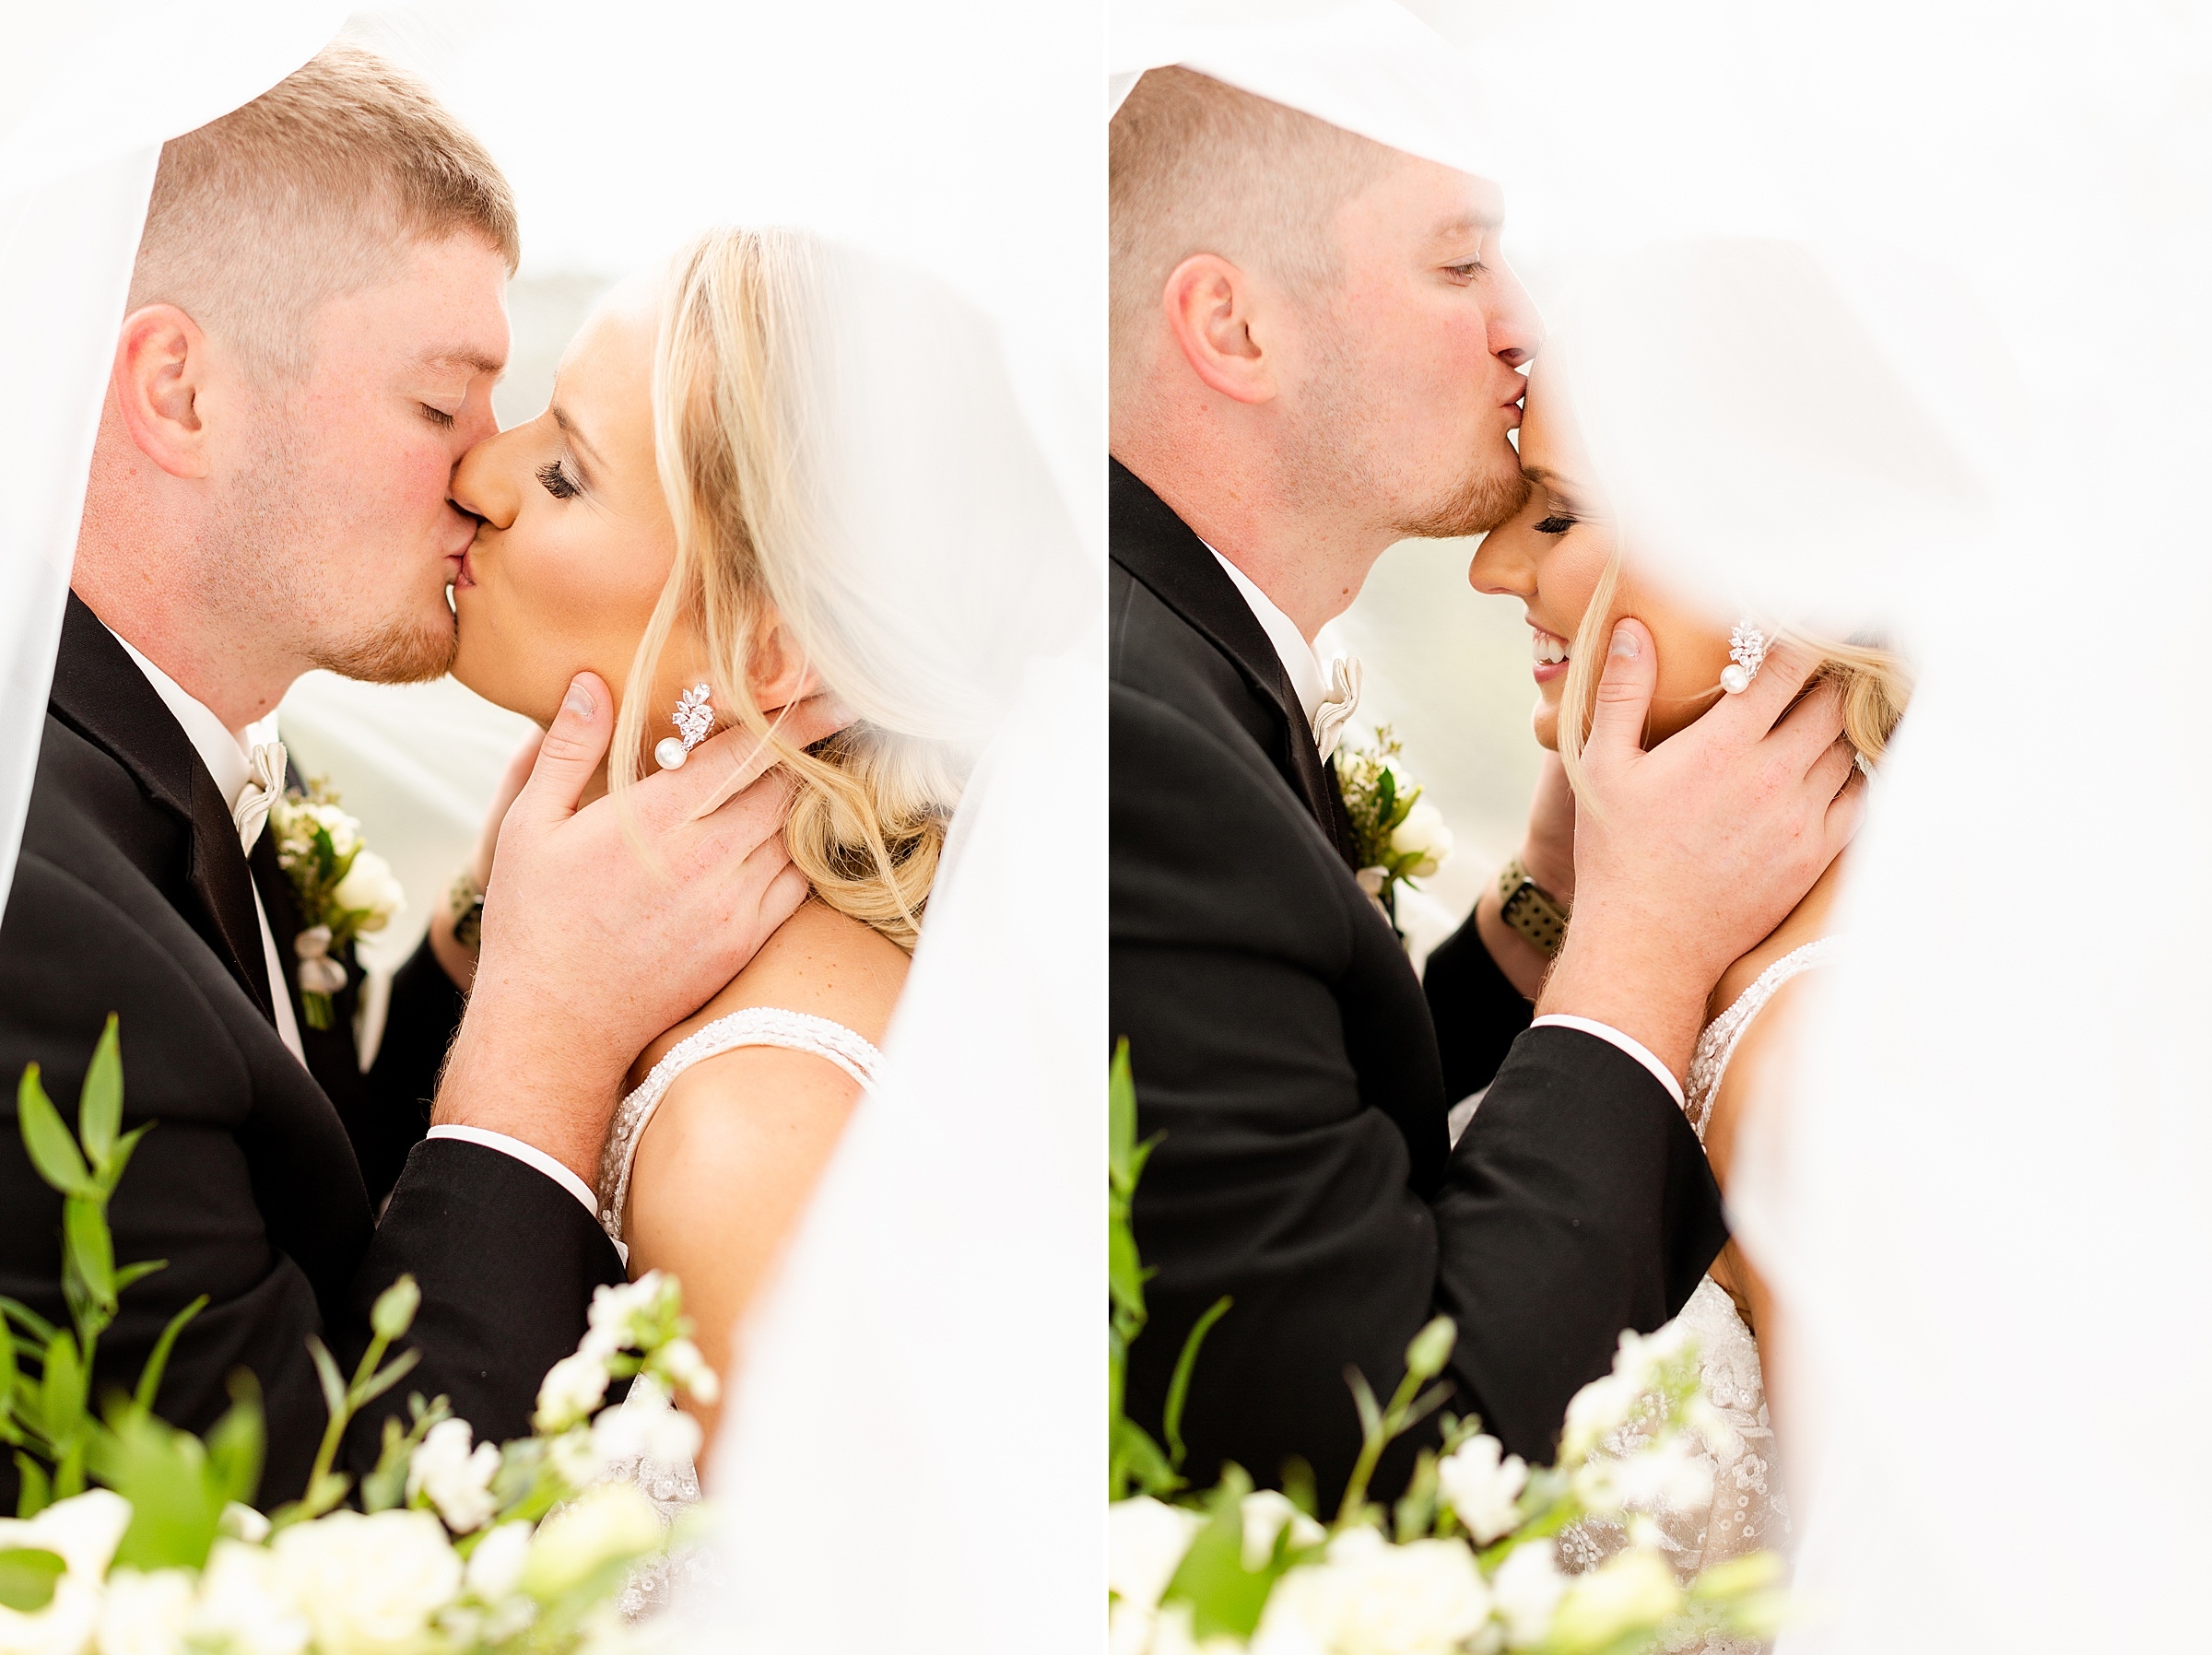 Hannah and Cody's Wedding in Booneville, IN103.jpg